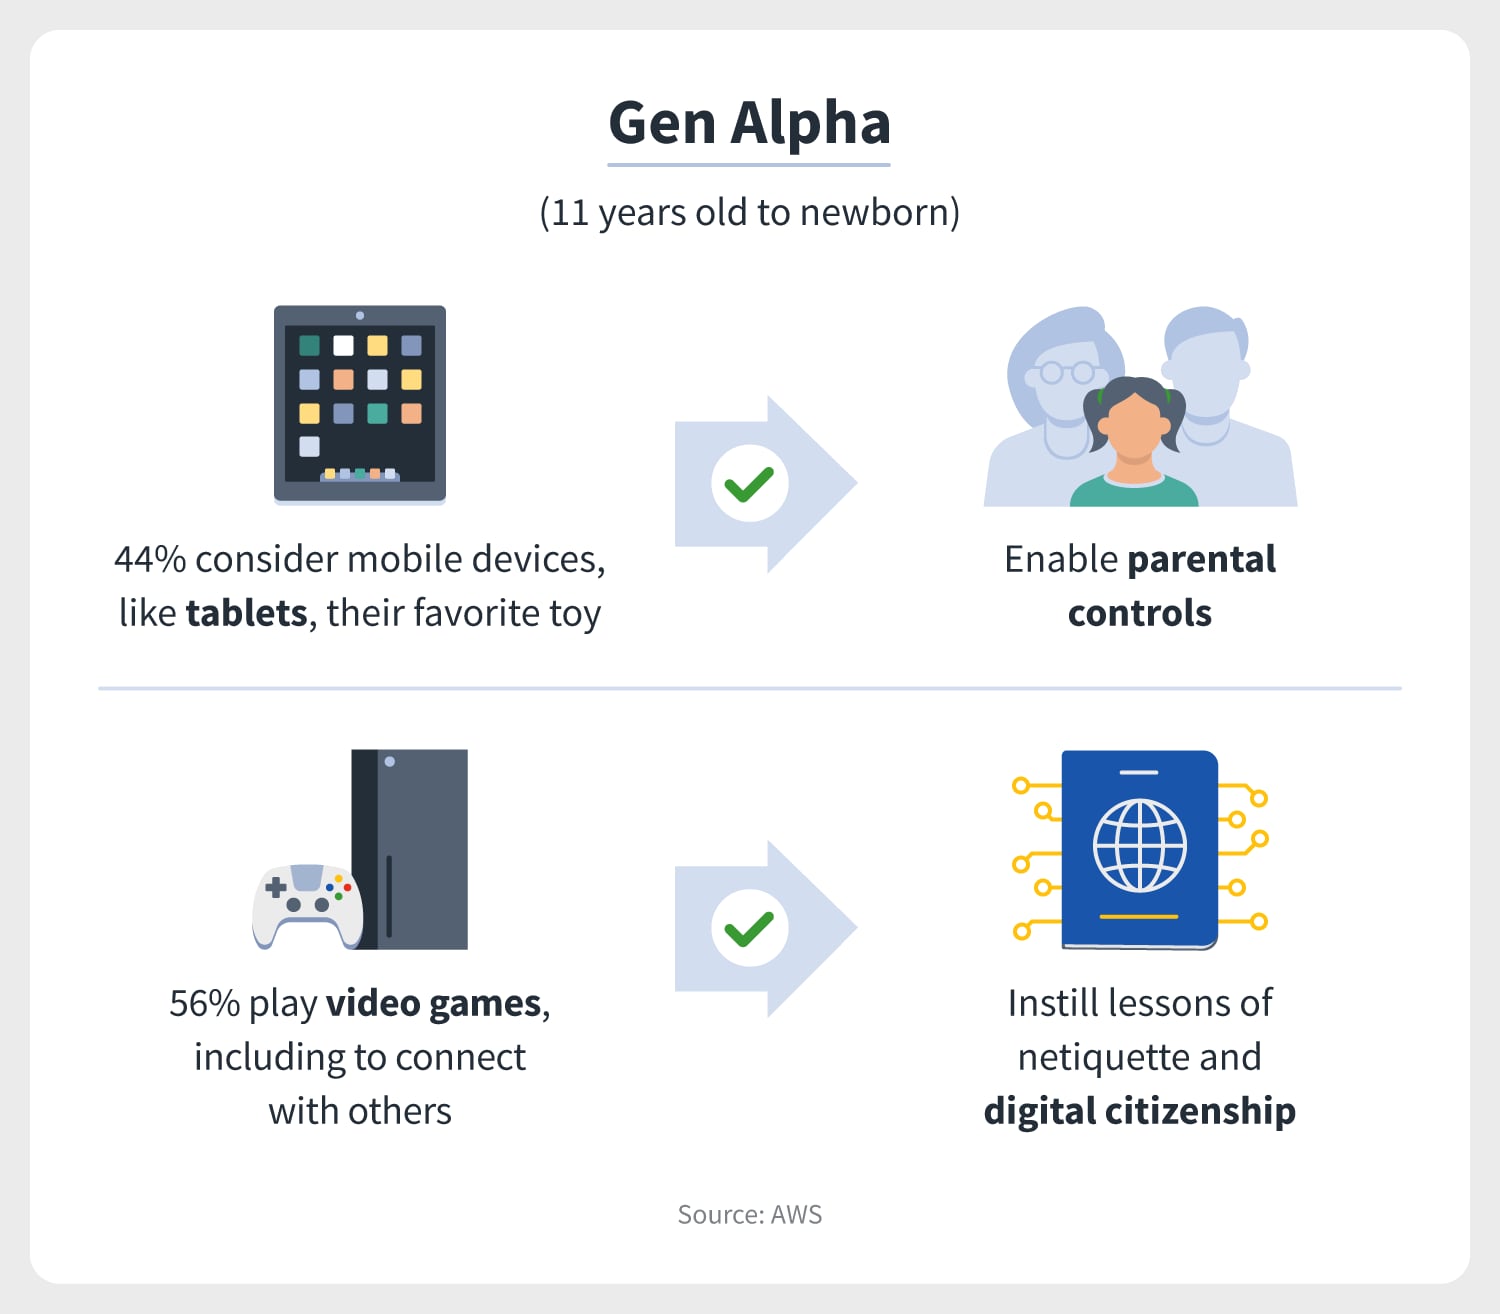 a tablet and a video game indicate that the digital generation Gen Alpha prefers these types of technology most and that they should level up their cybersecurity when using them